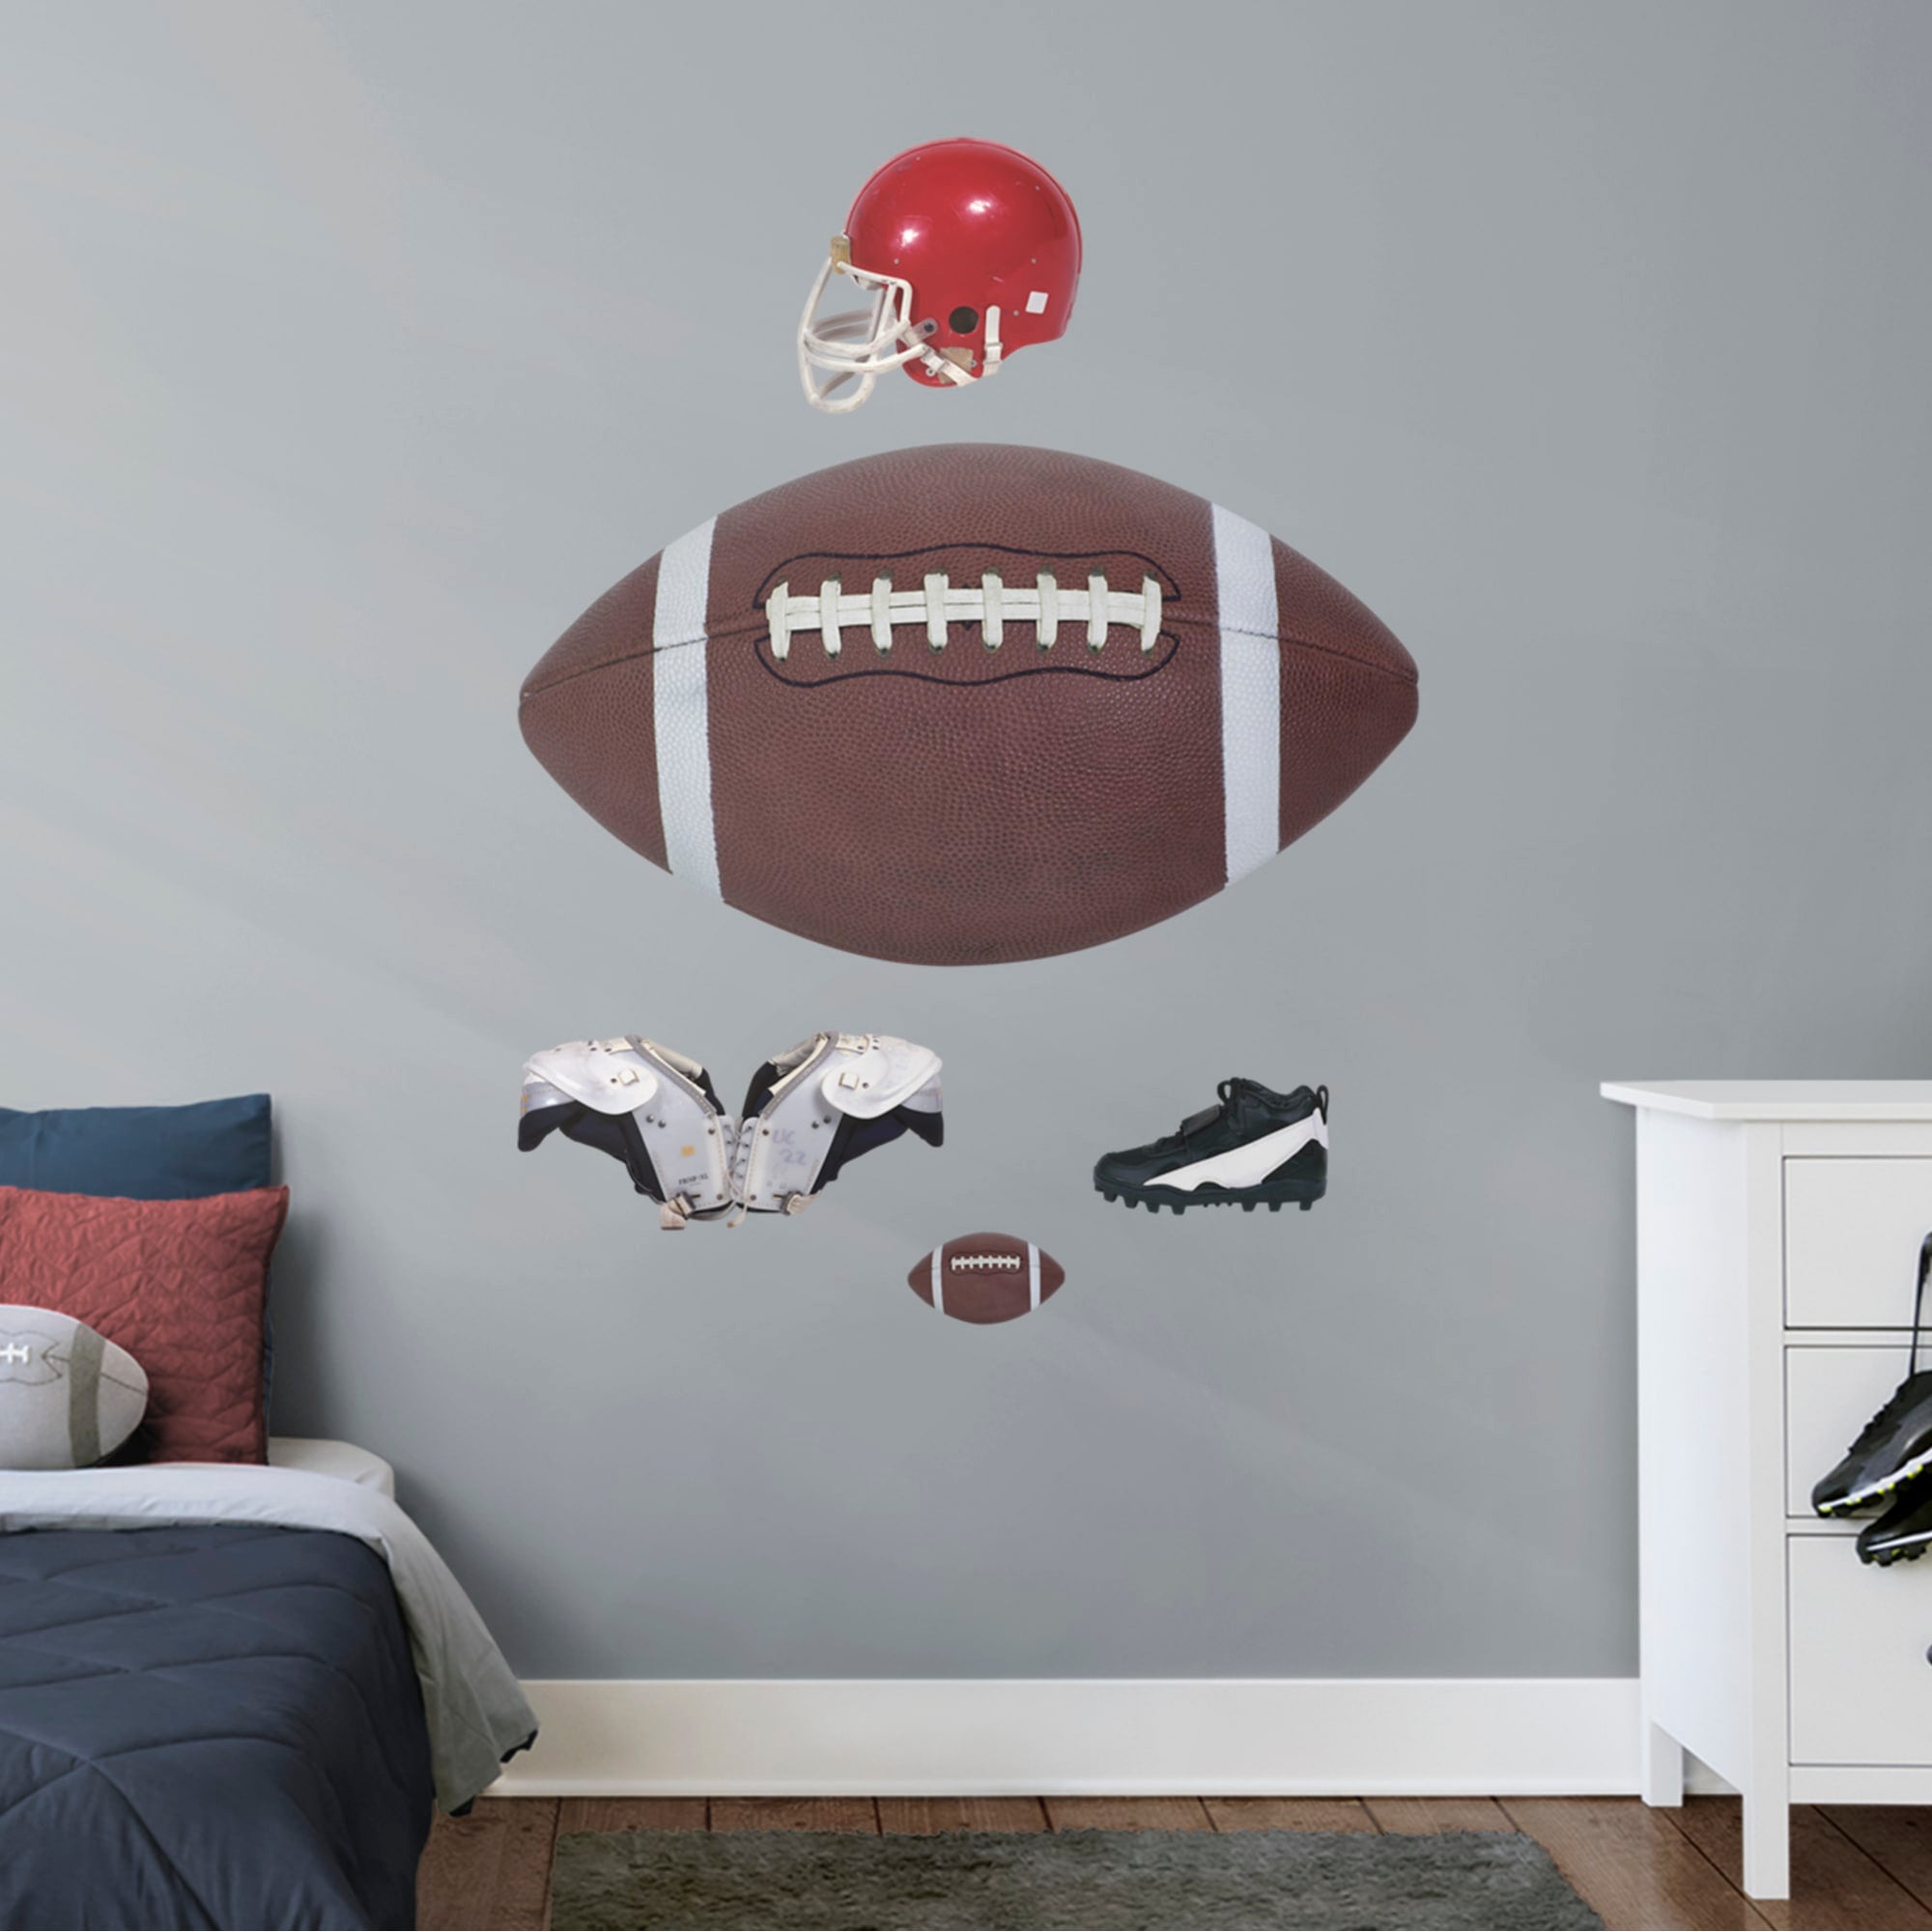 Football: Assorted Graphics - Removable Vinyl Decal 51.0"W x 30.0"H by Fathead